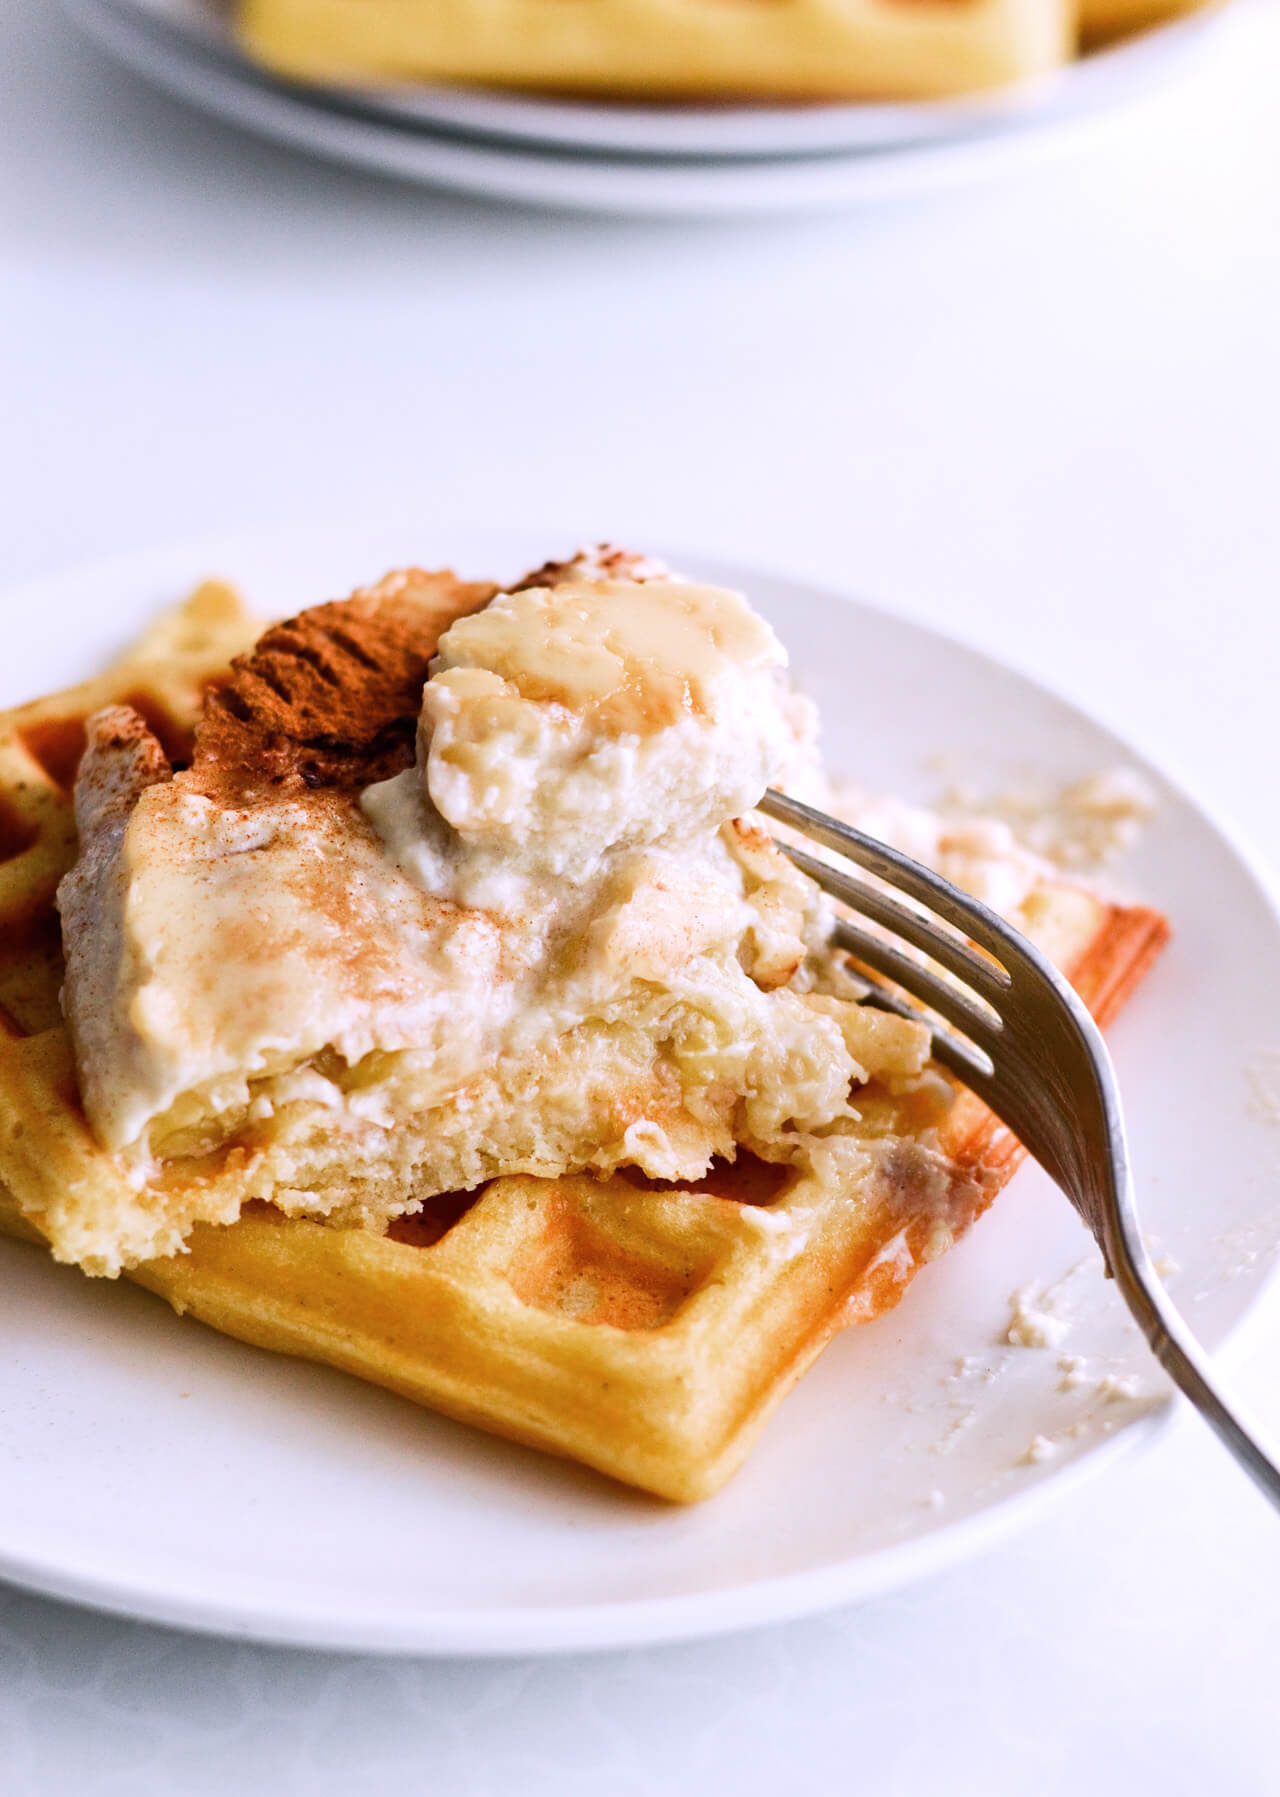 Recipe for crispy waffles, bananas baked in ricotta! A wonderful, indulgent breakfast, great for the whole family! And easy to make too!